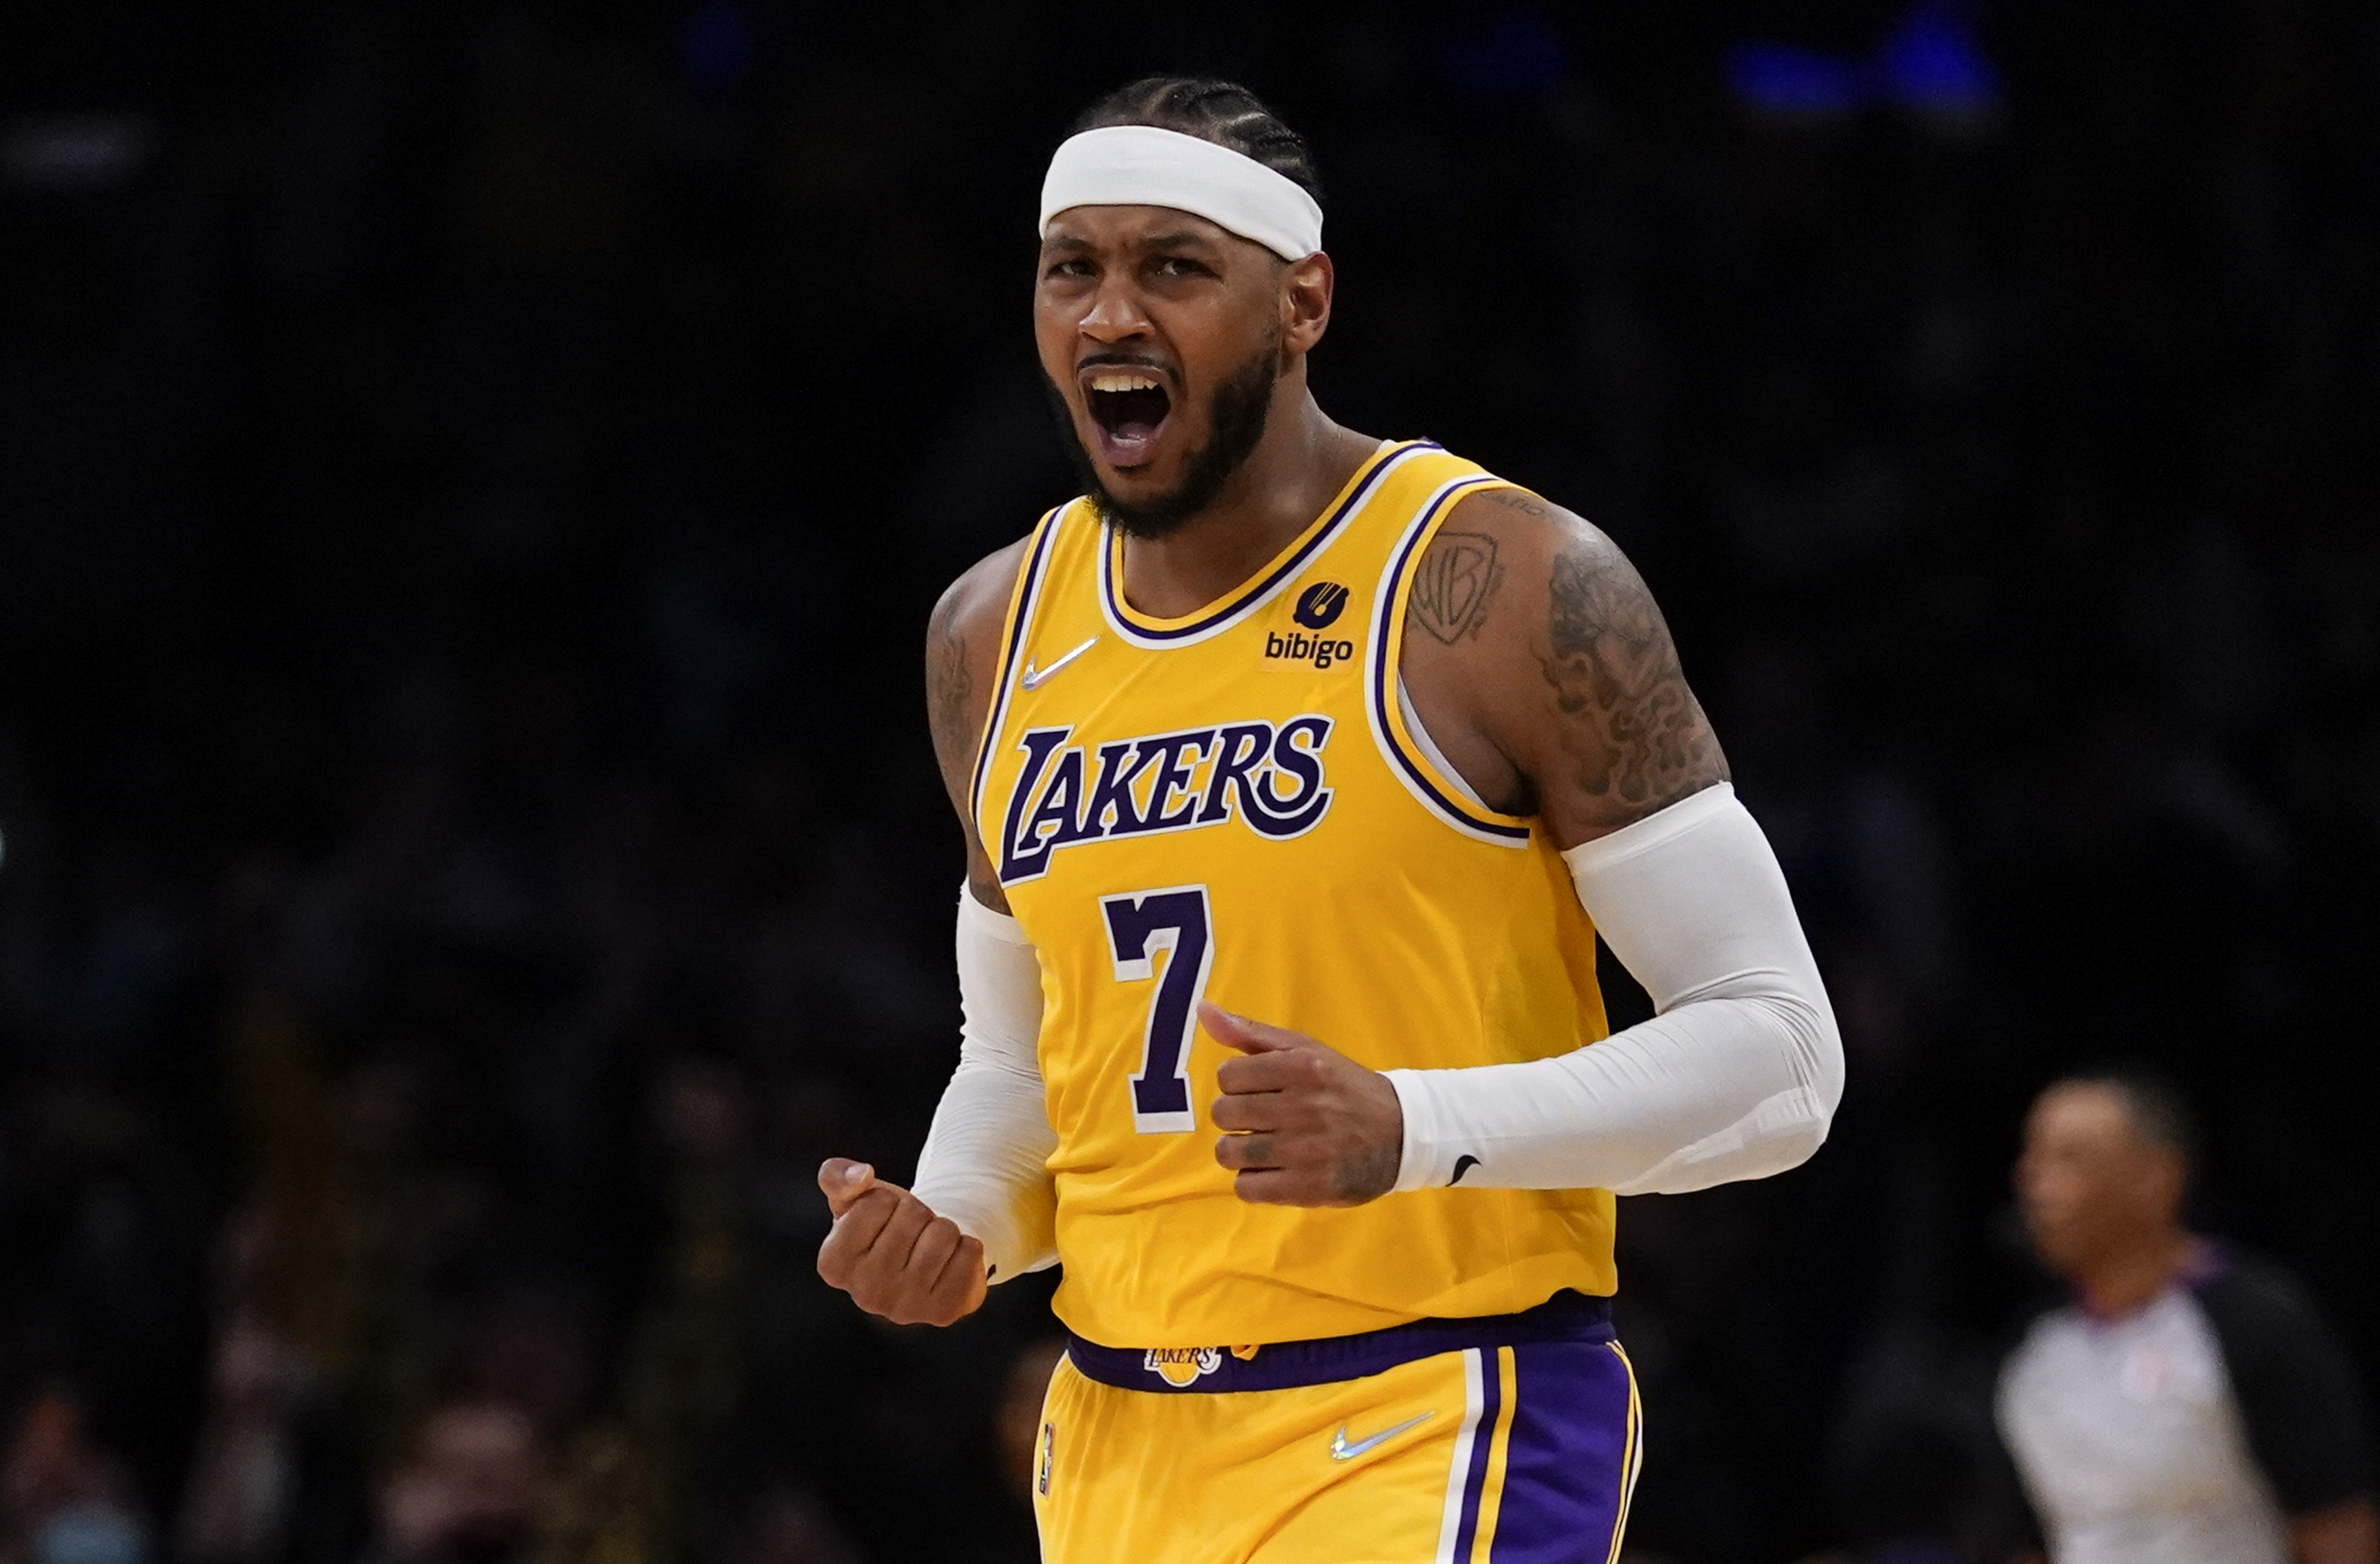 Lakers News: Carmelo Anthony Stresses Importance Of Winning Next Game